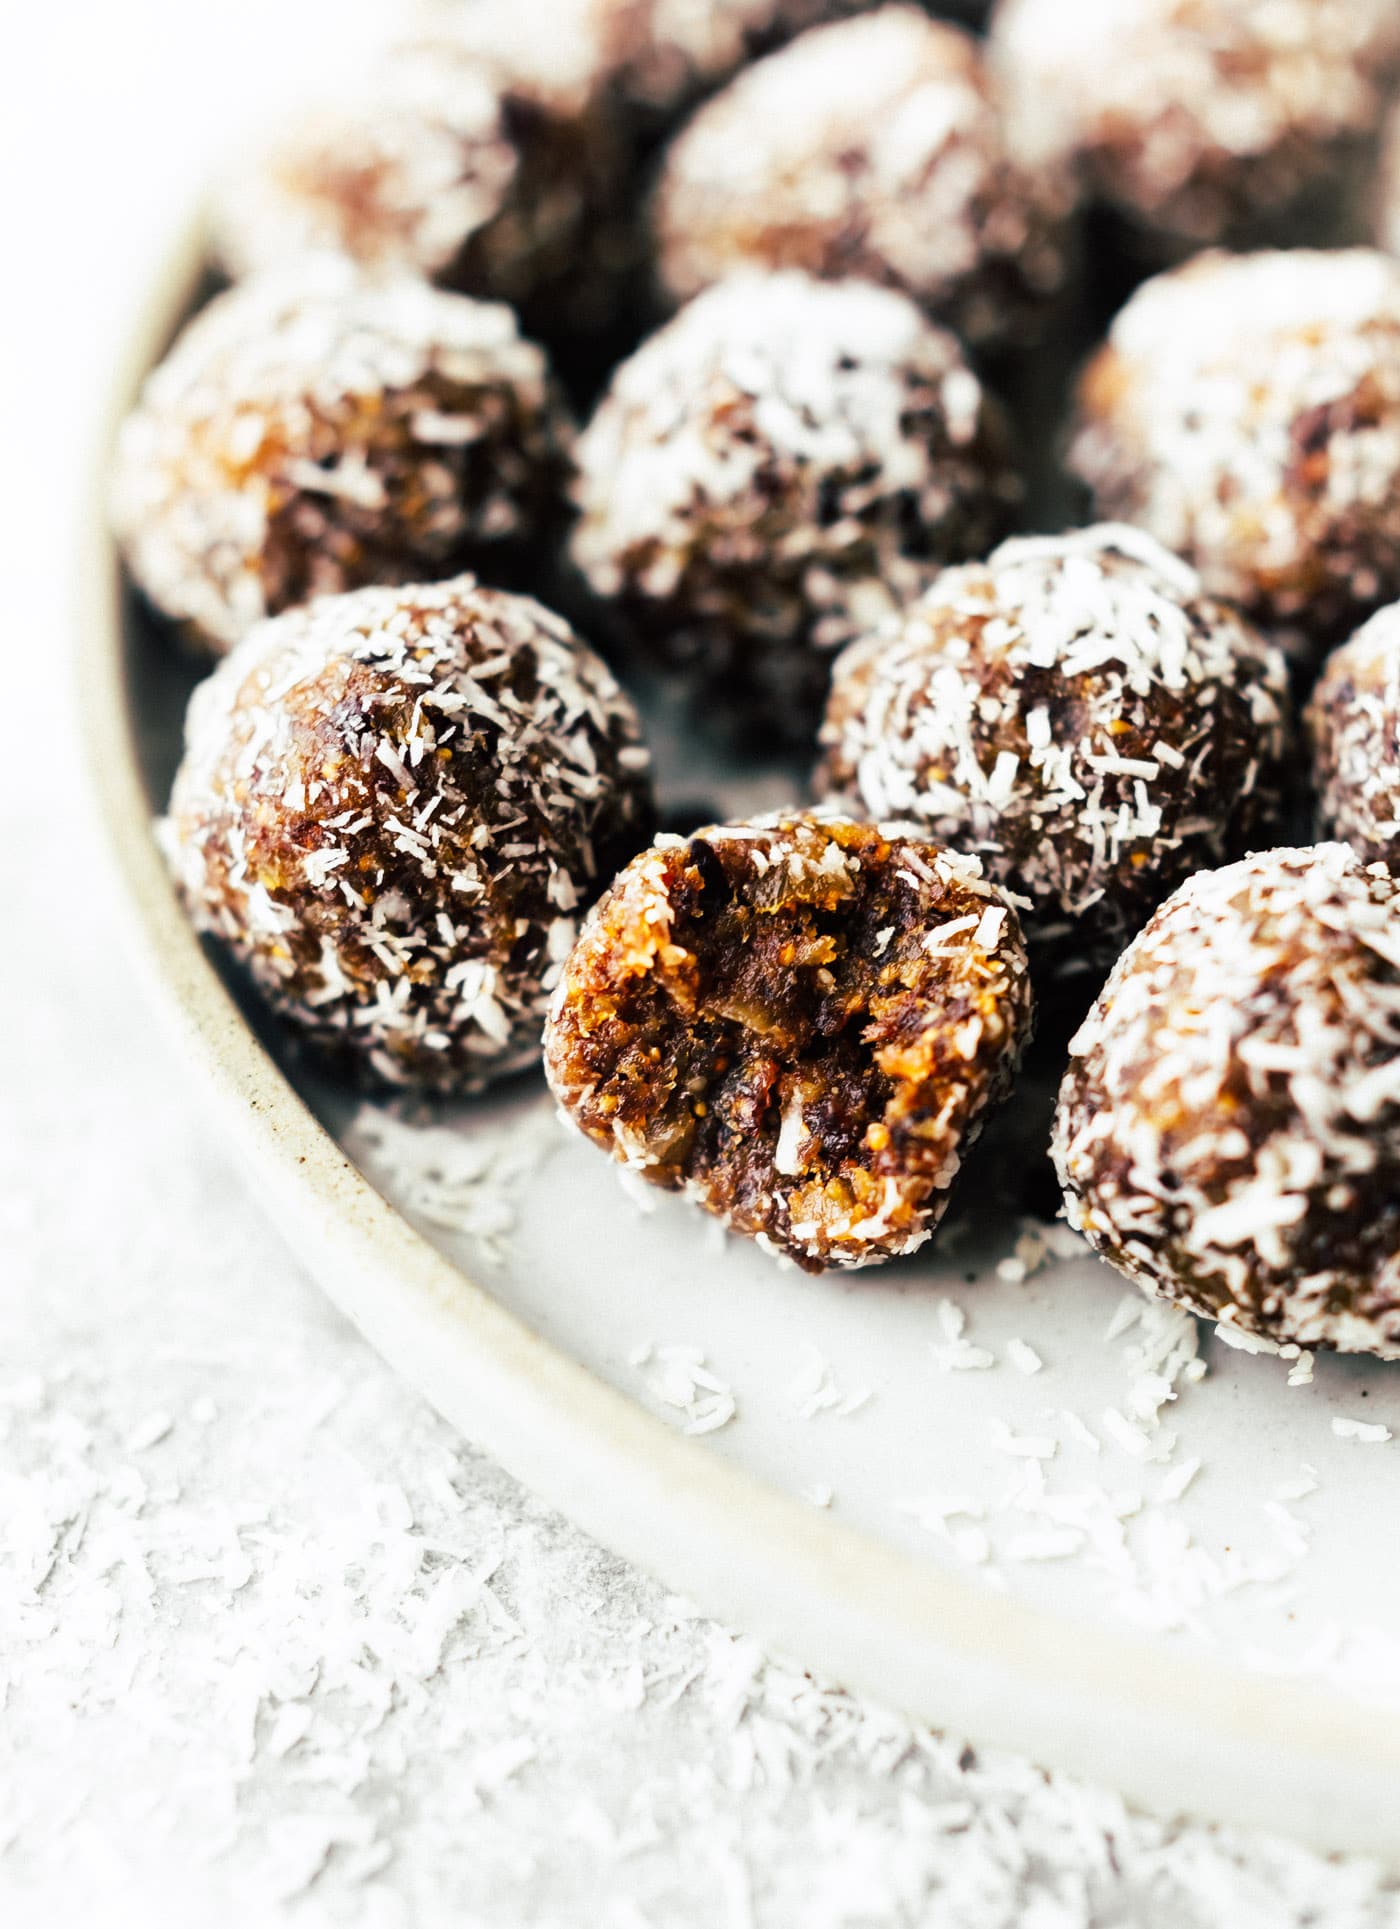 plate of No Bake Coconut Apricot Fig Bliss balls, energy bites with a bite taken out of one ball and coconut shreds all around the plate